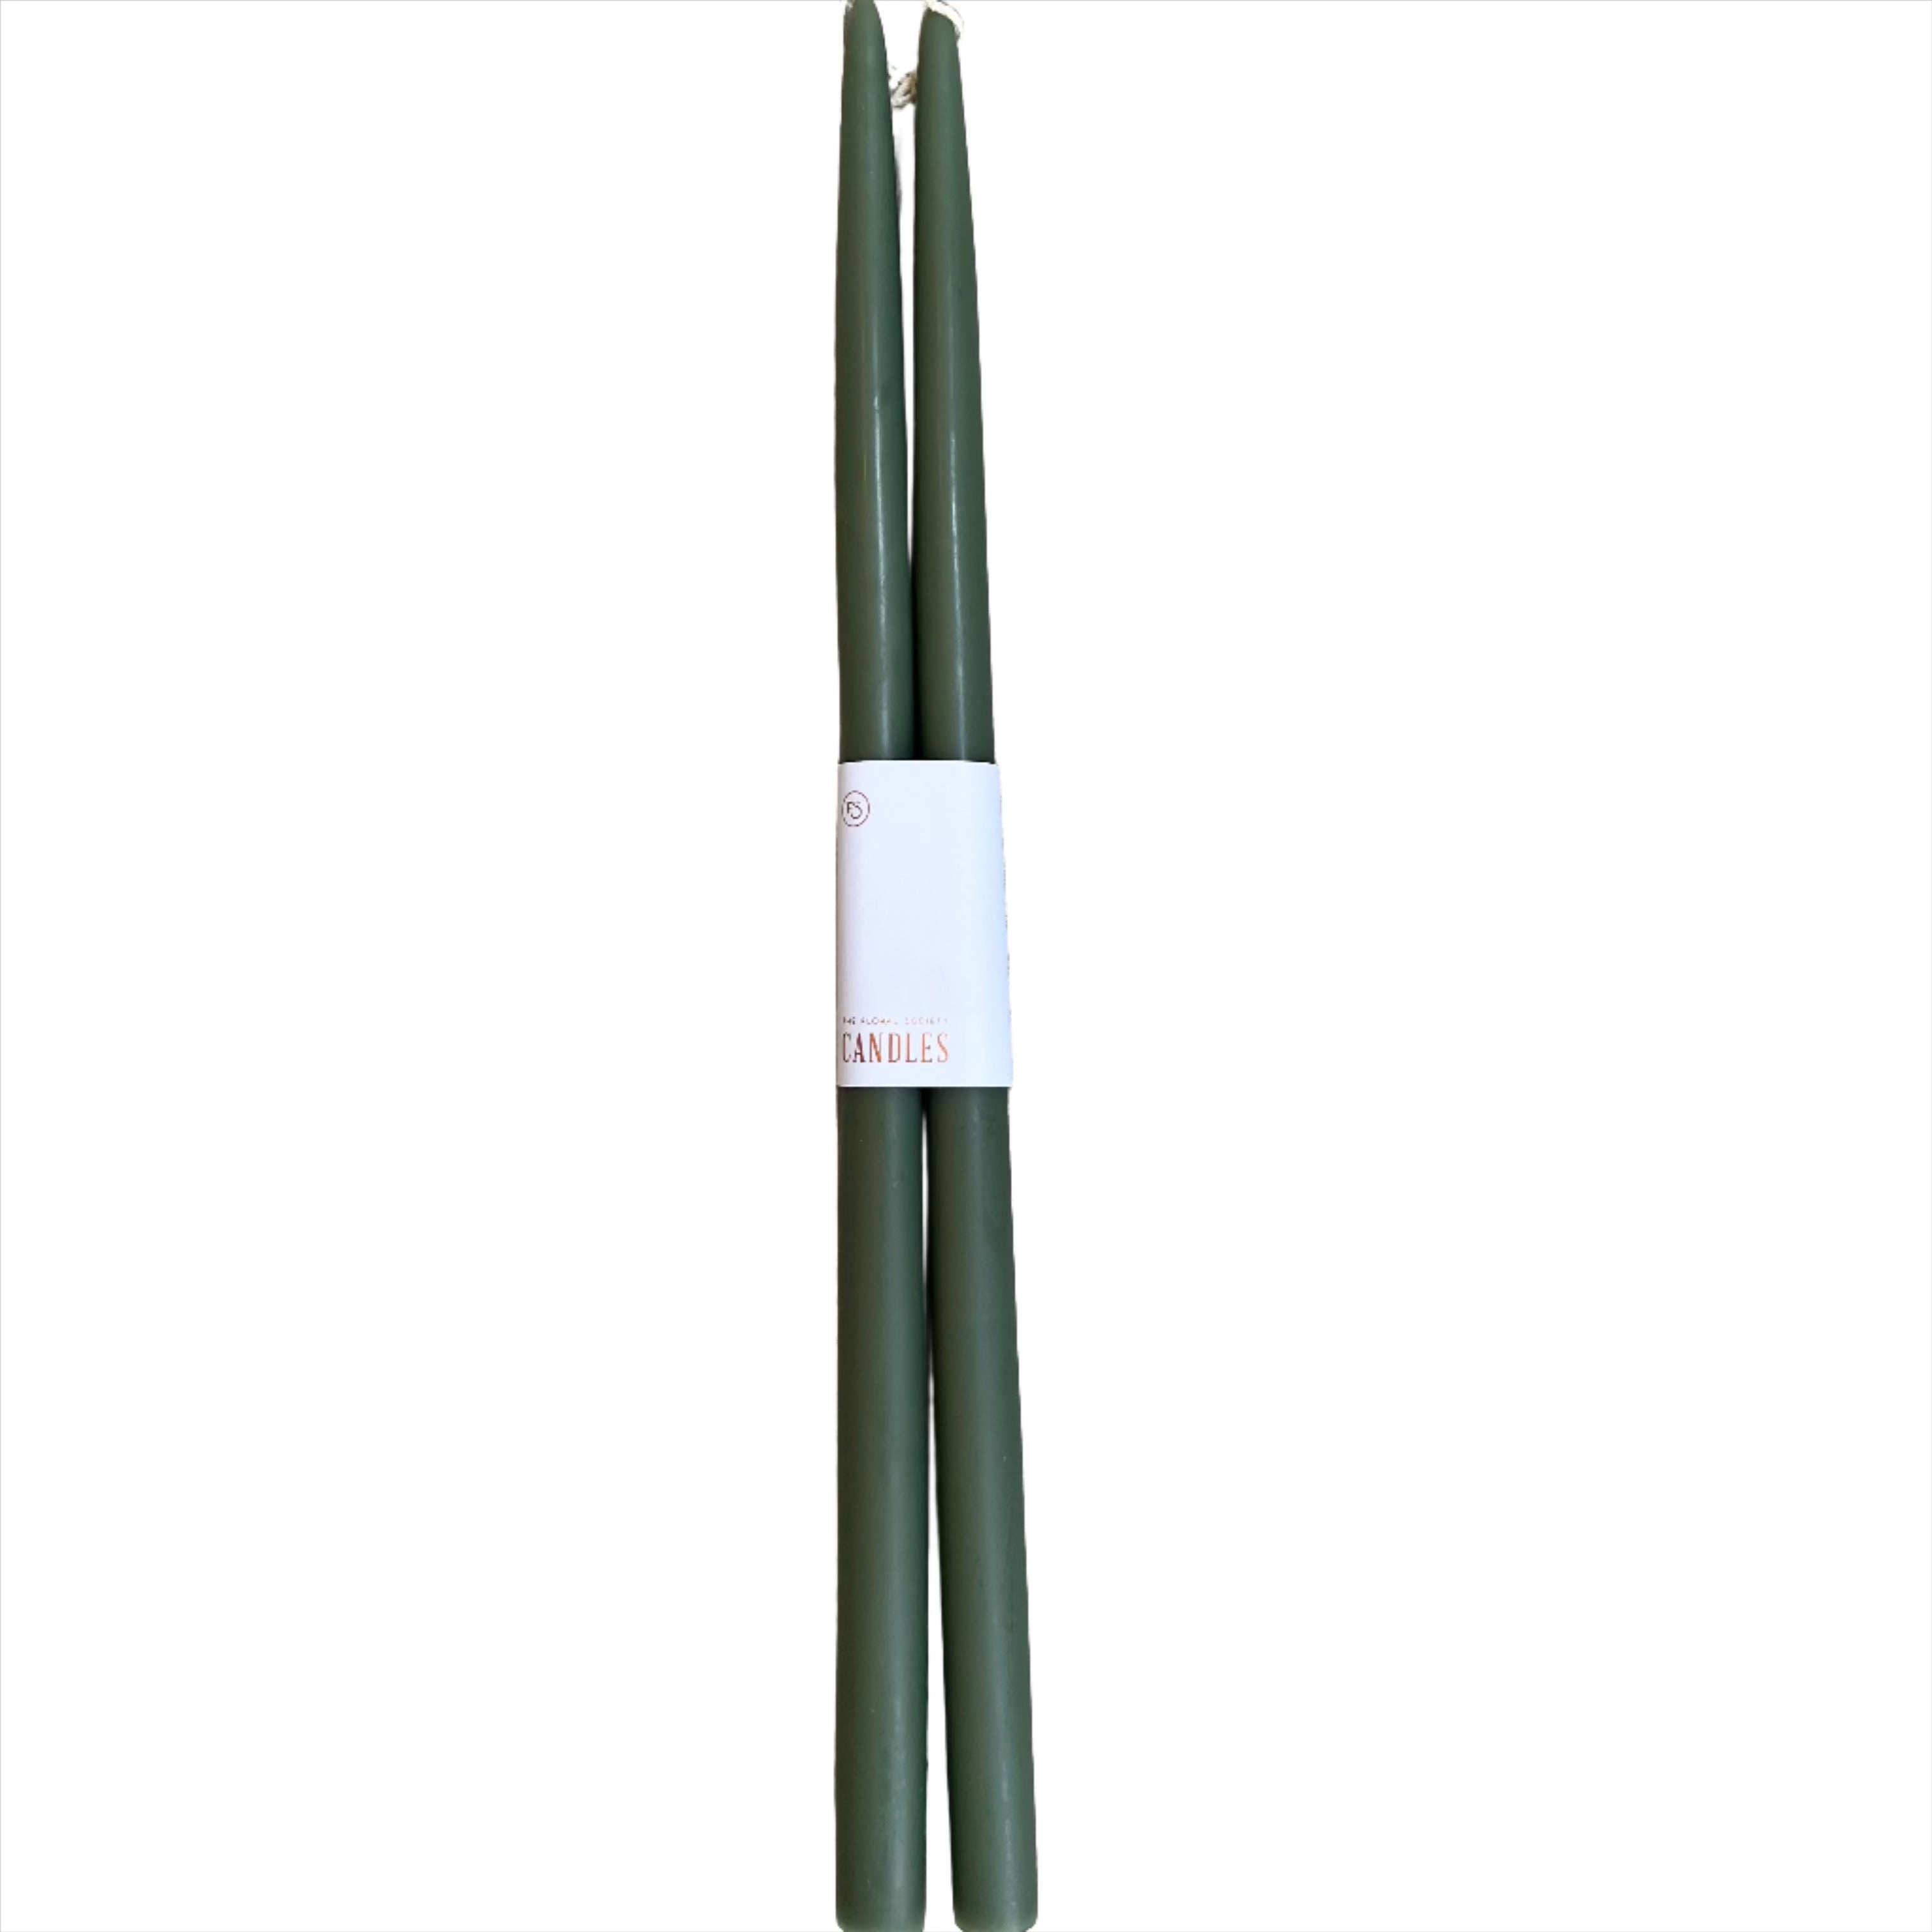 18" Pair of Taper Candles